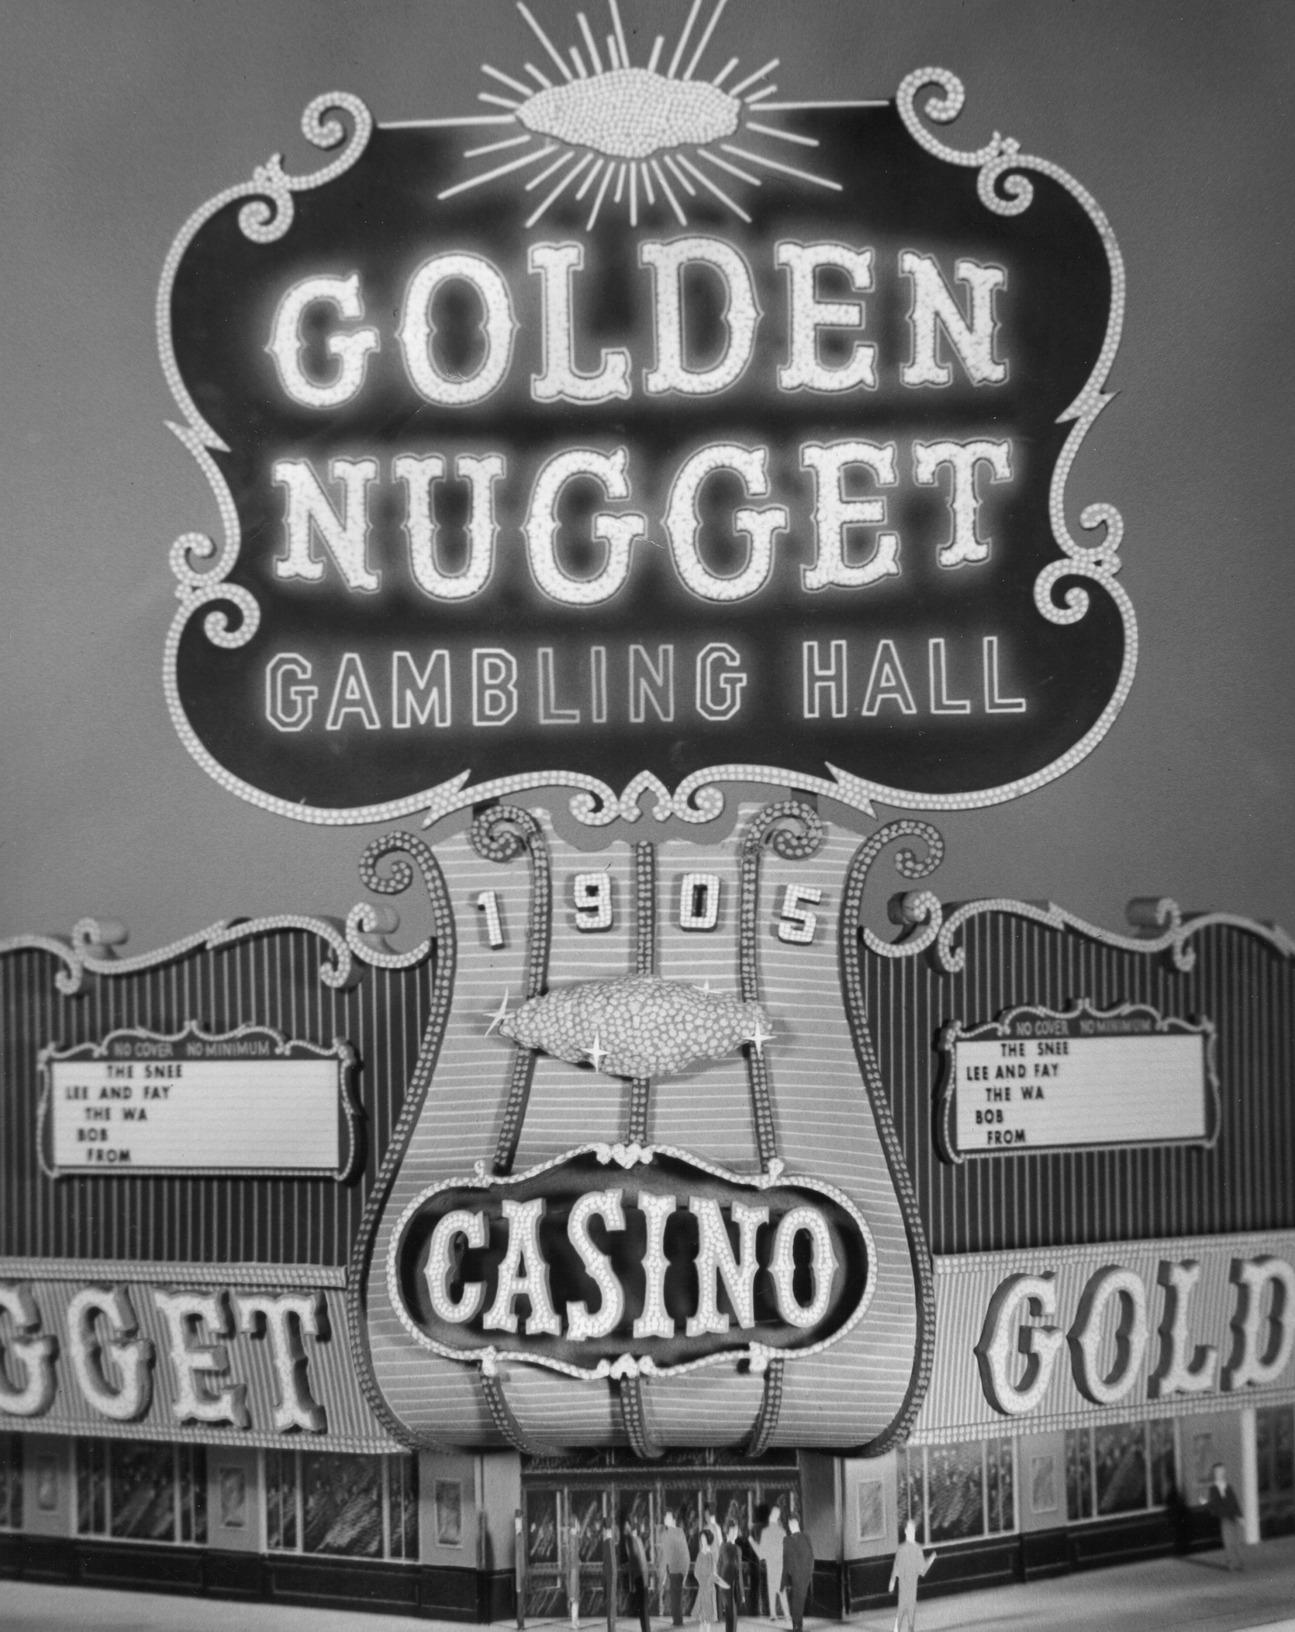 Photograph of a detail of a scale model of the Golden Nugget Gambling Hall (Las Vegas), 1958